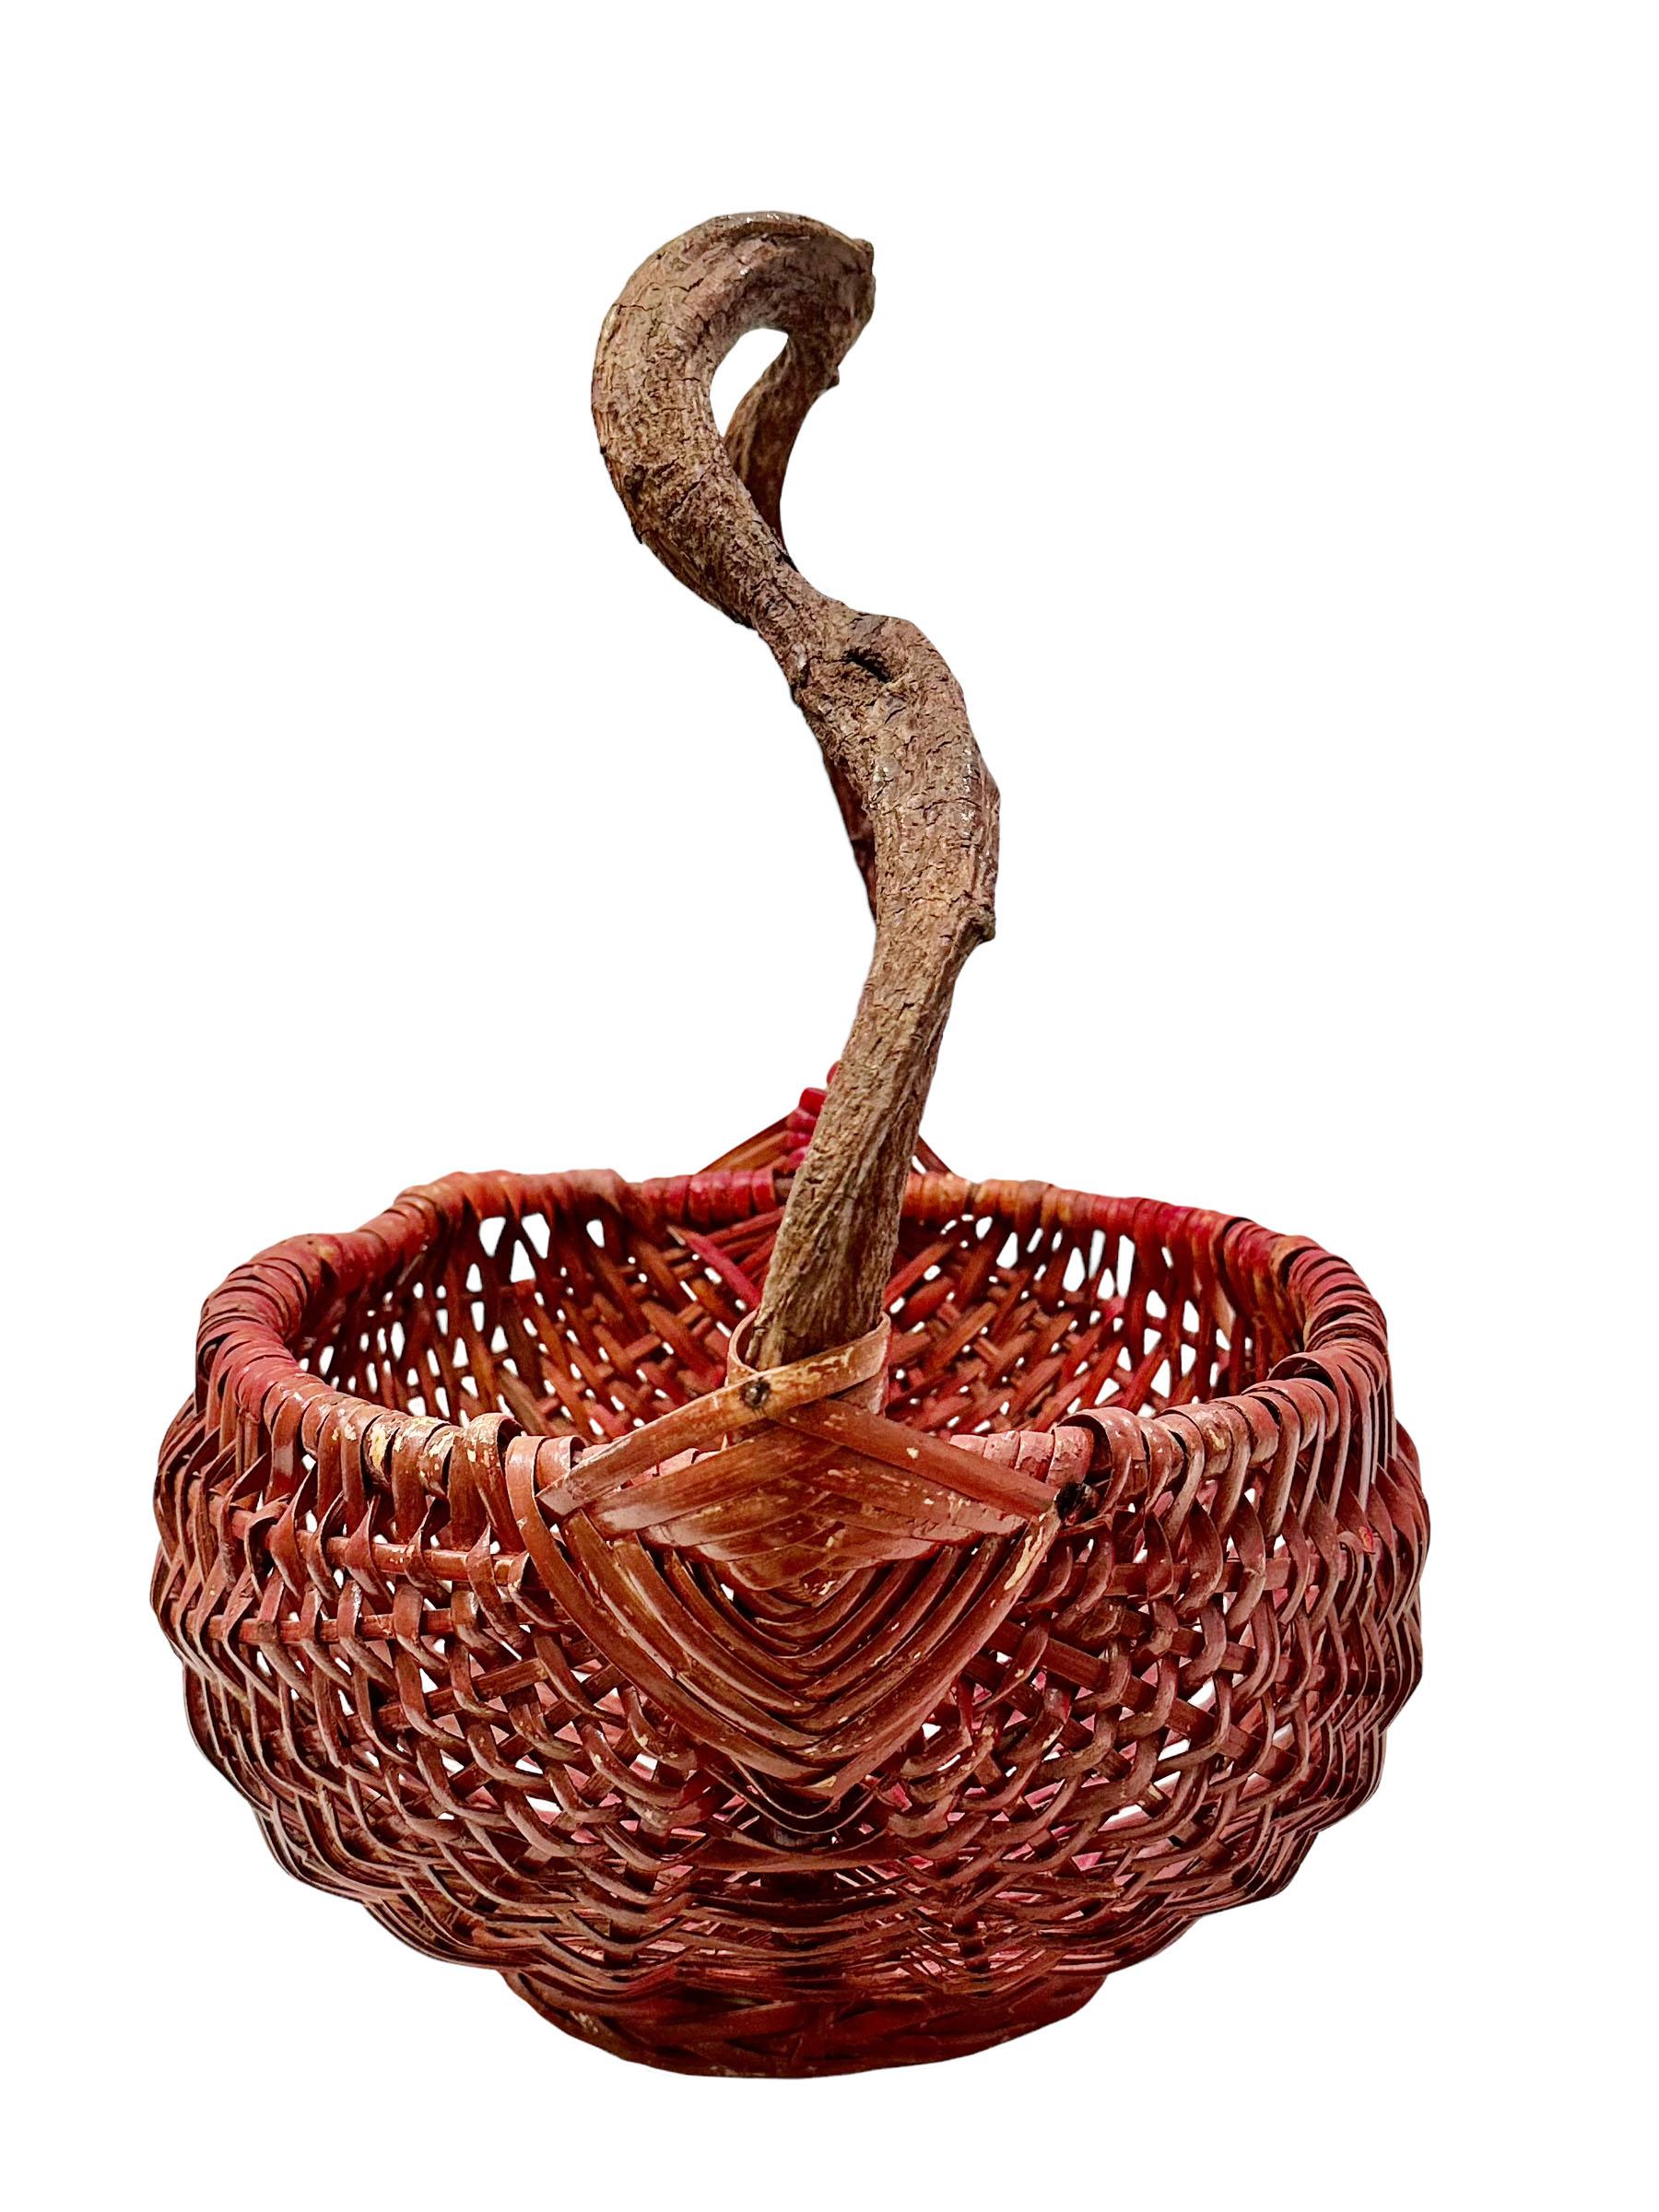 A vintage Japanese basket with a wooden handle and a wonderful red patina. Circa early 20th century, Japan. 
